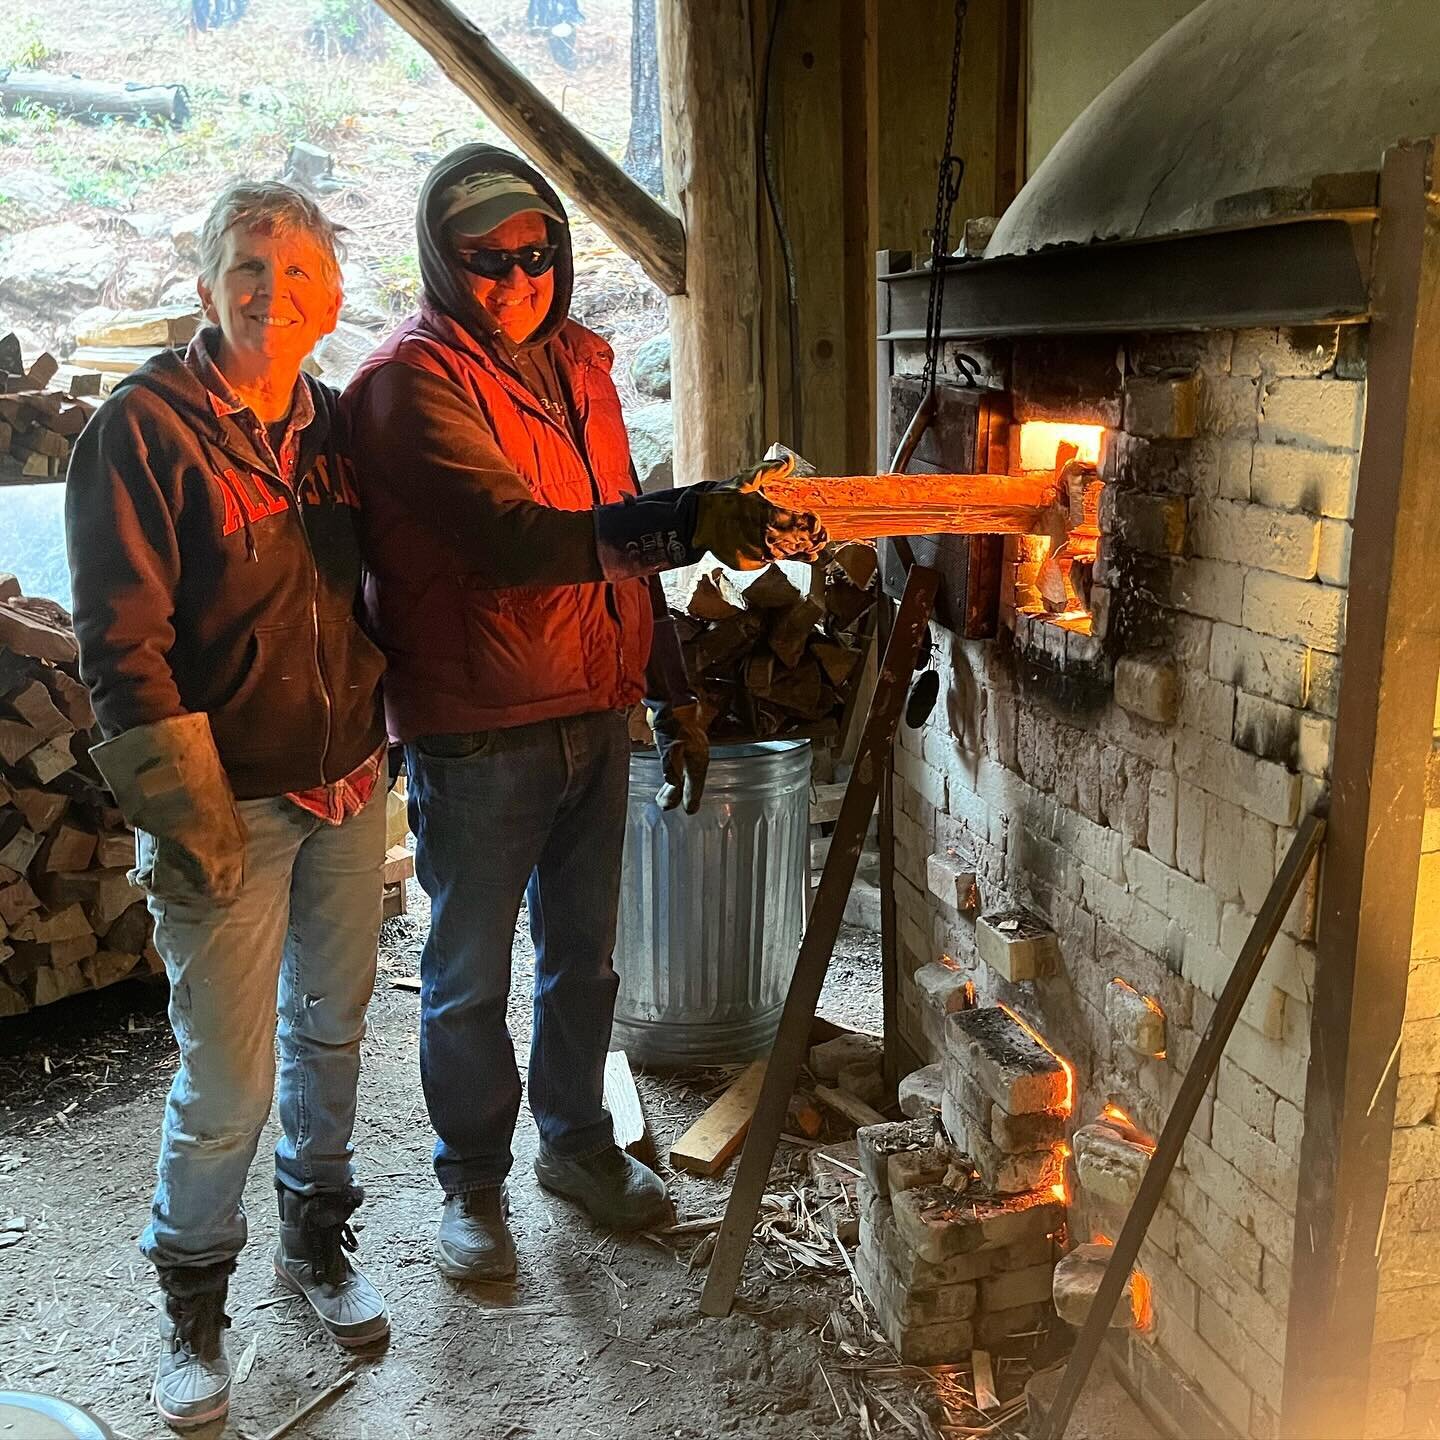 Lots of fun stoking the train kiln @cobbartandecology . This is Michelle and Scott&rsquo;s first wood fire and their instincts are very good! 🔥🧡#woodfiredceramics #cobbartandecologyproject #trainkiln